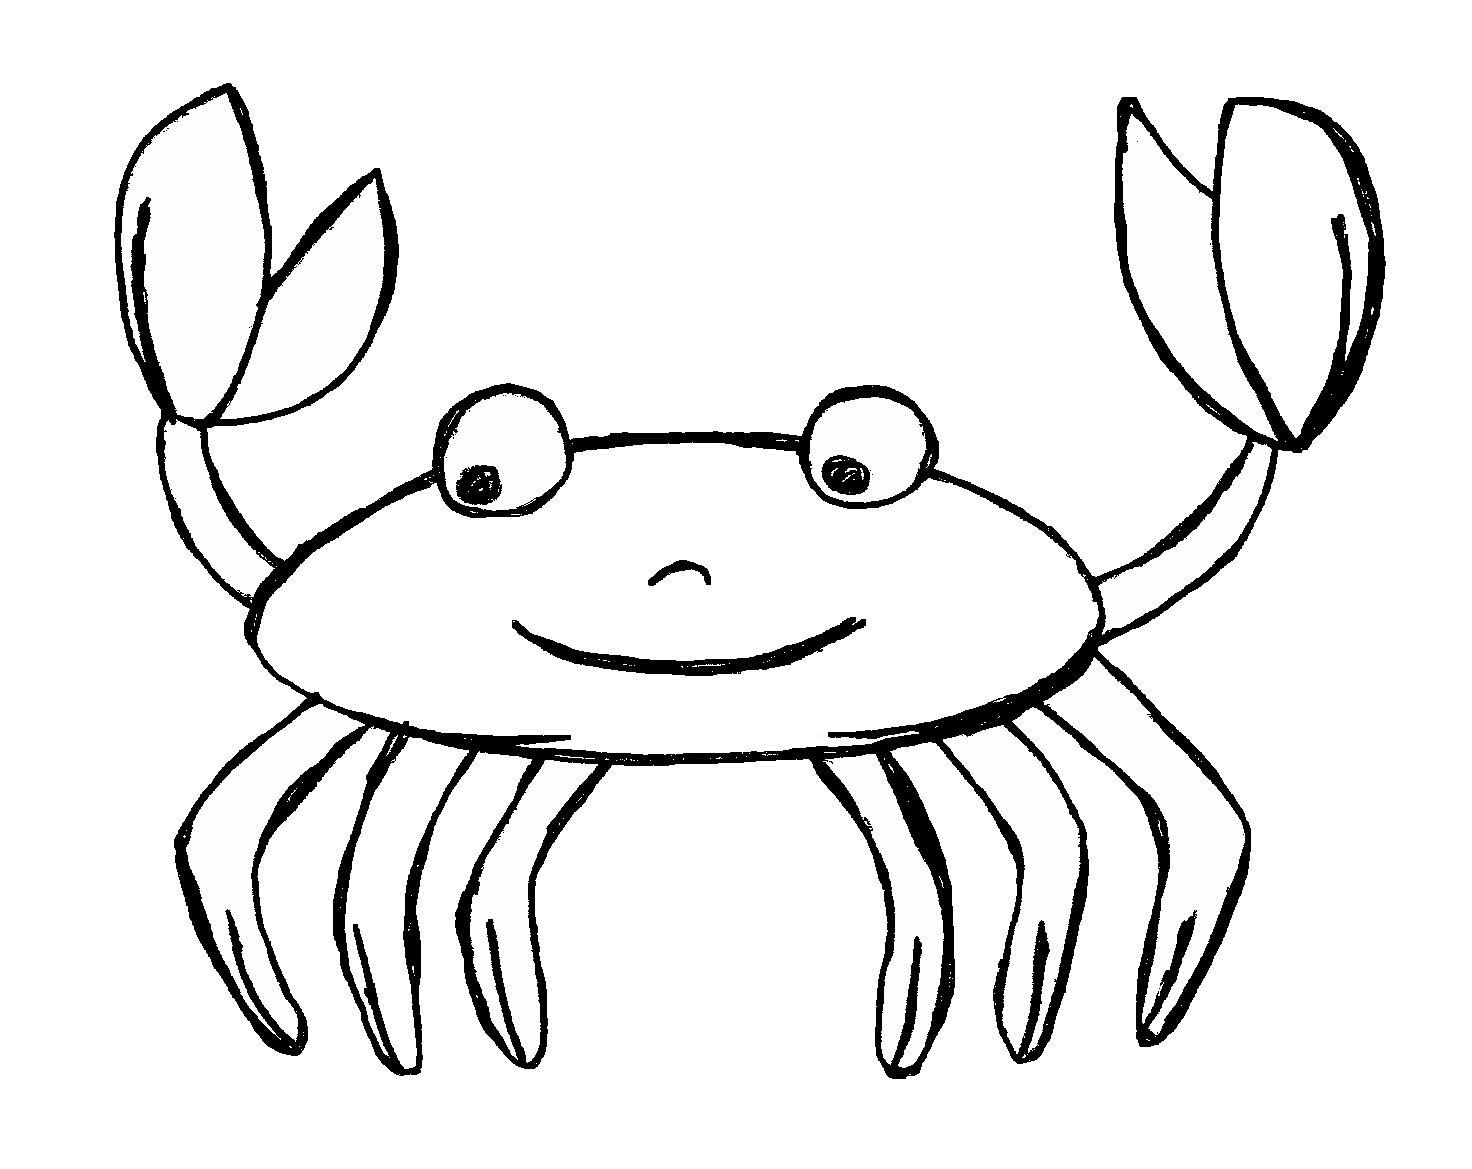 Crab clipart outline